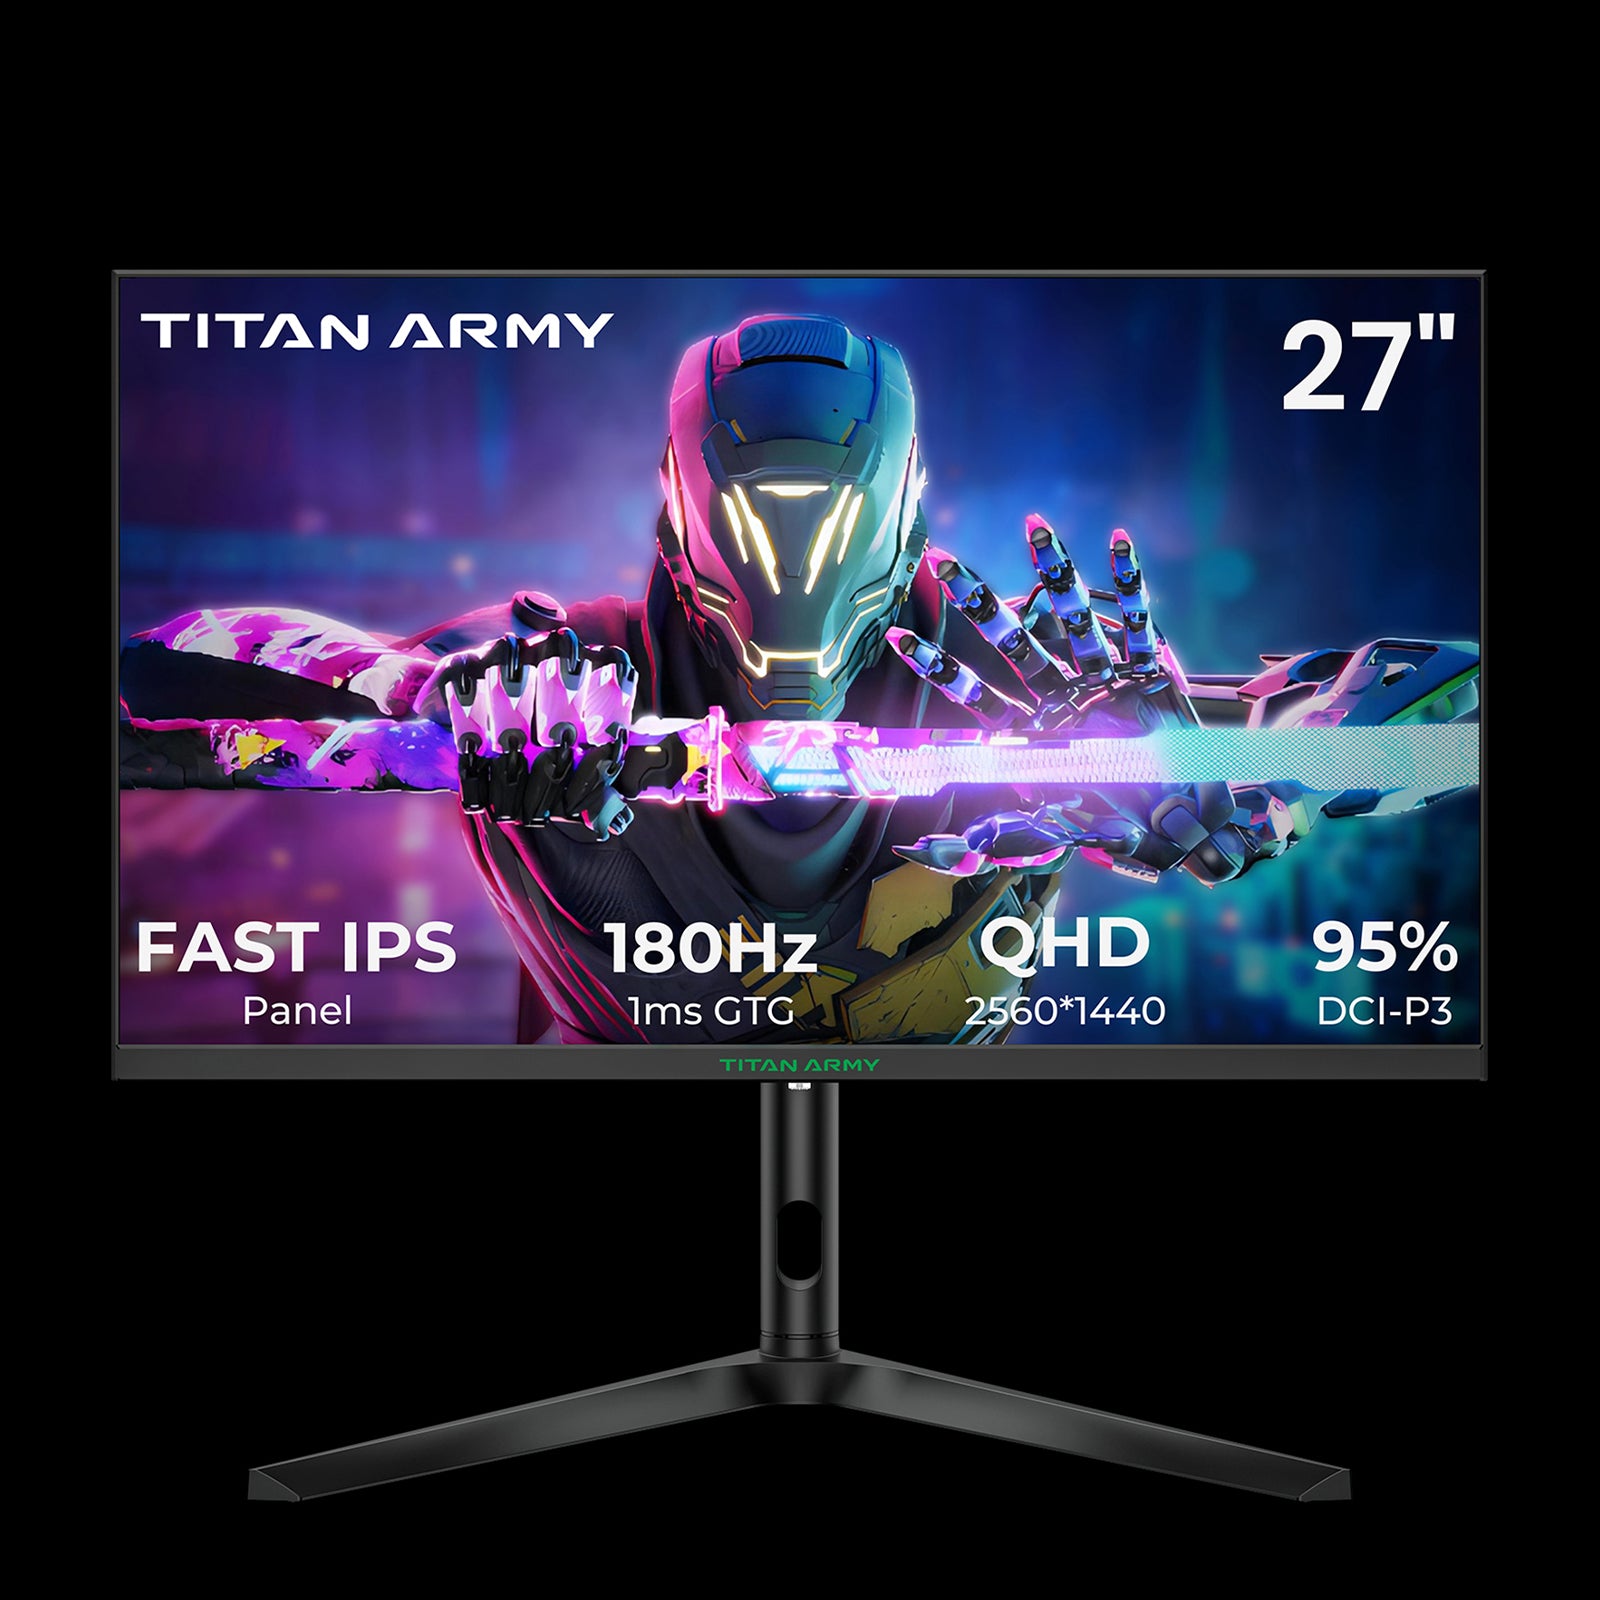 TITAN ARMY 344K165HZ HDR400 Curved Immersive Gaming Monitor UltraWide WQHD  3440x1440 FreeSync 1ms 144HZ 1000R Built-in Speaker